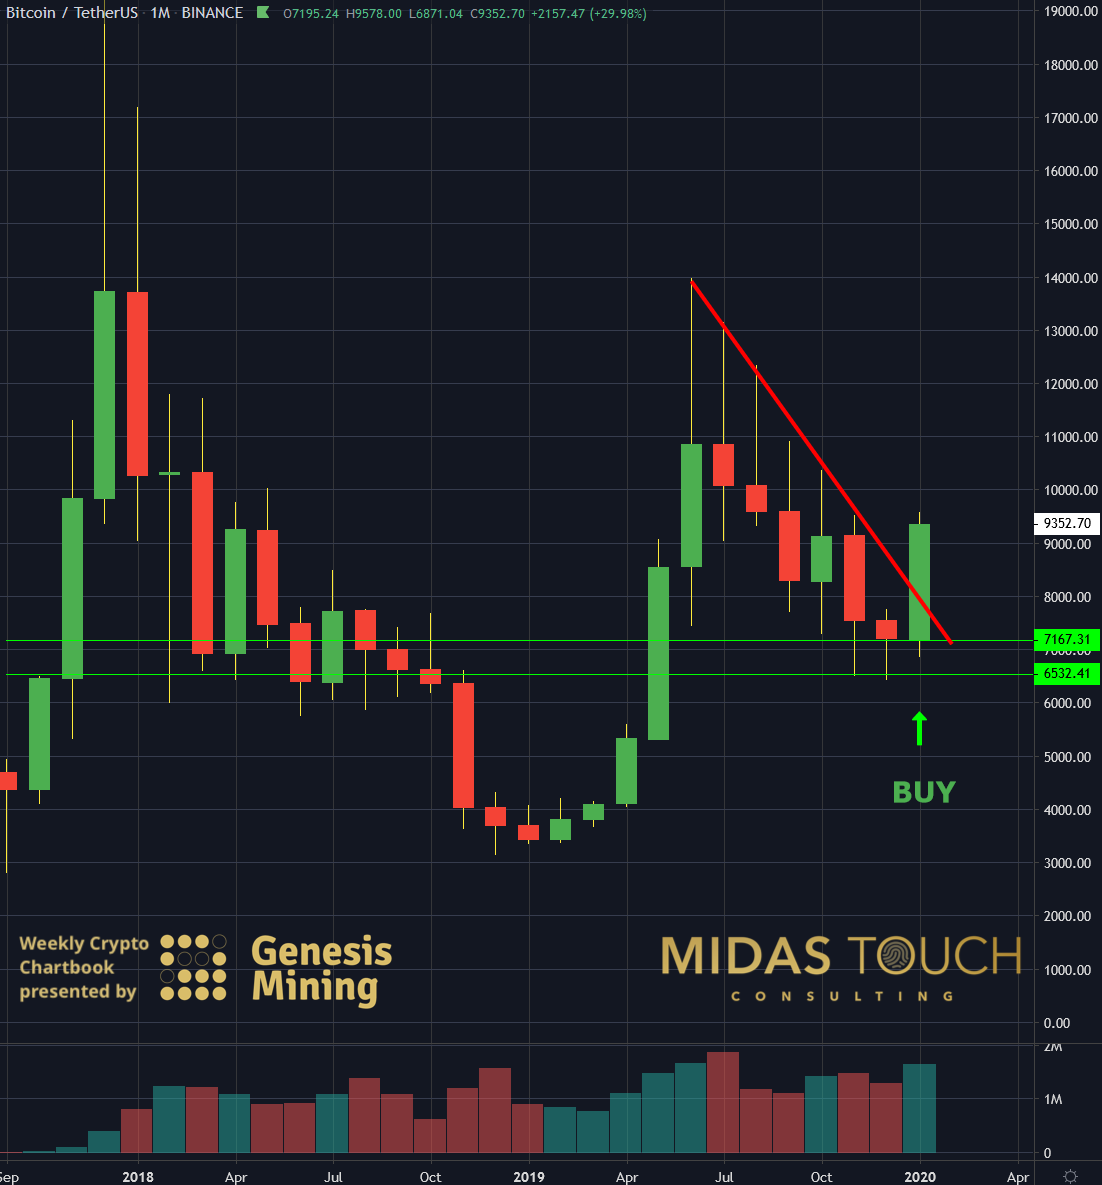 BTCUSDT monthly chart as of January 31st, 2020